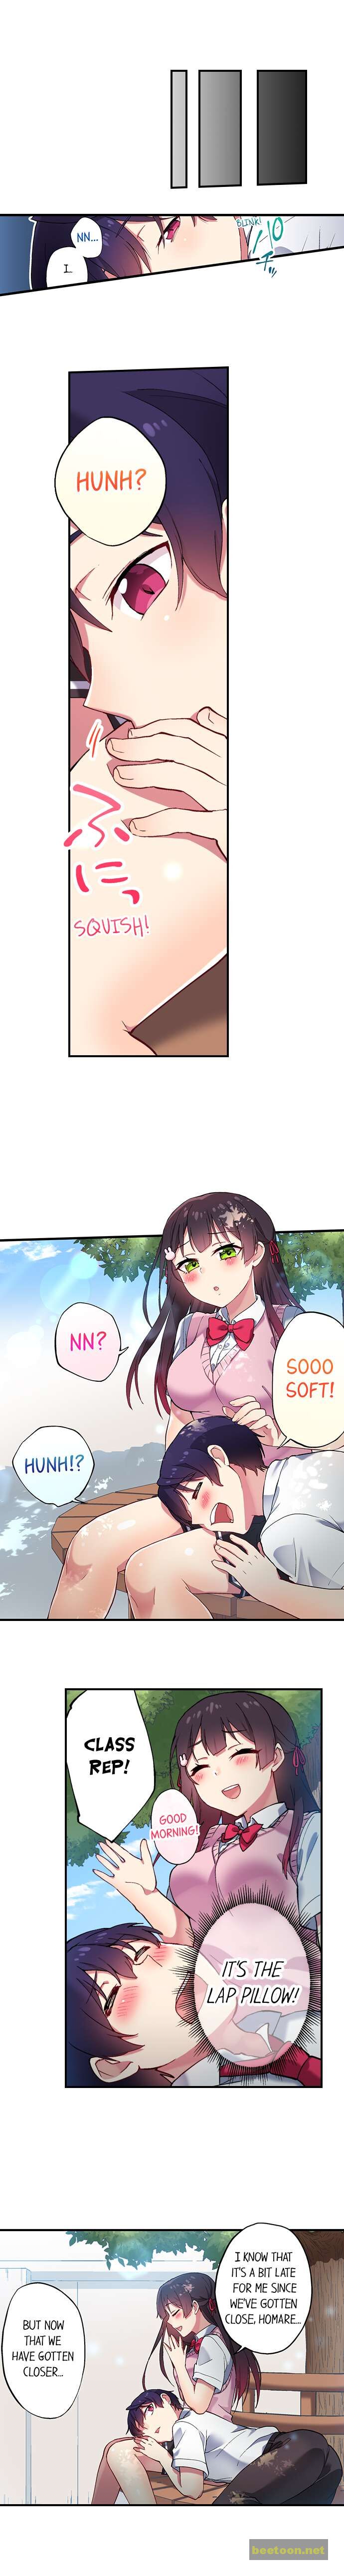 I Can See The Number Of Times People Orgasm Chapter 105 - ManhwaFull.net